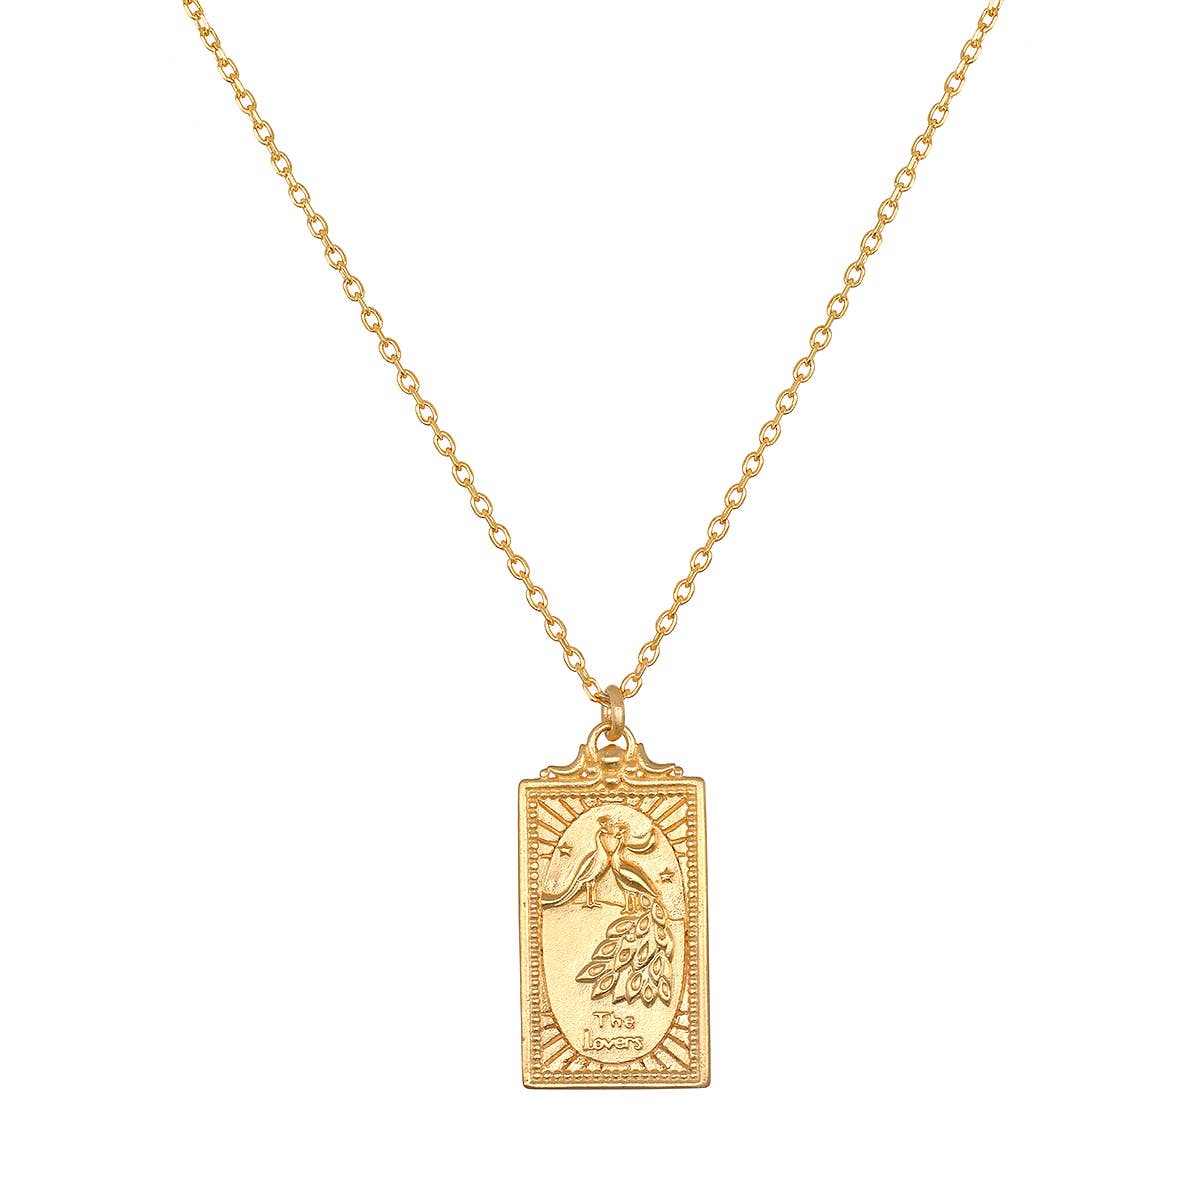 18" The Lovers tarot card necklace